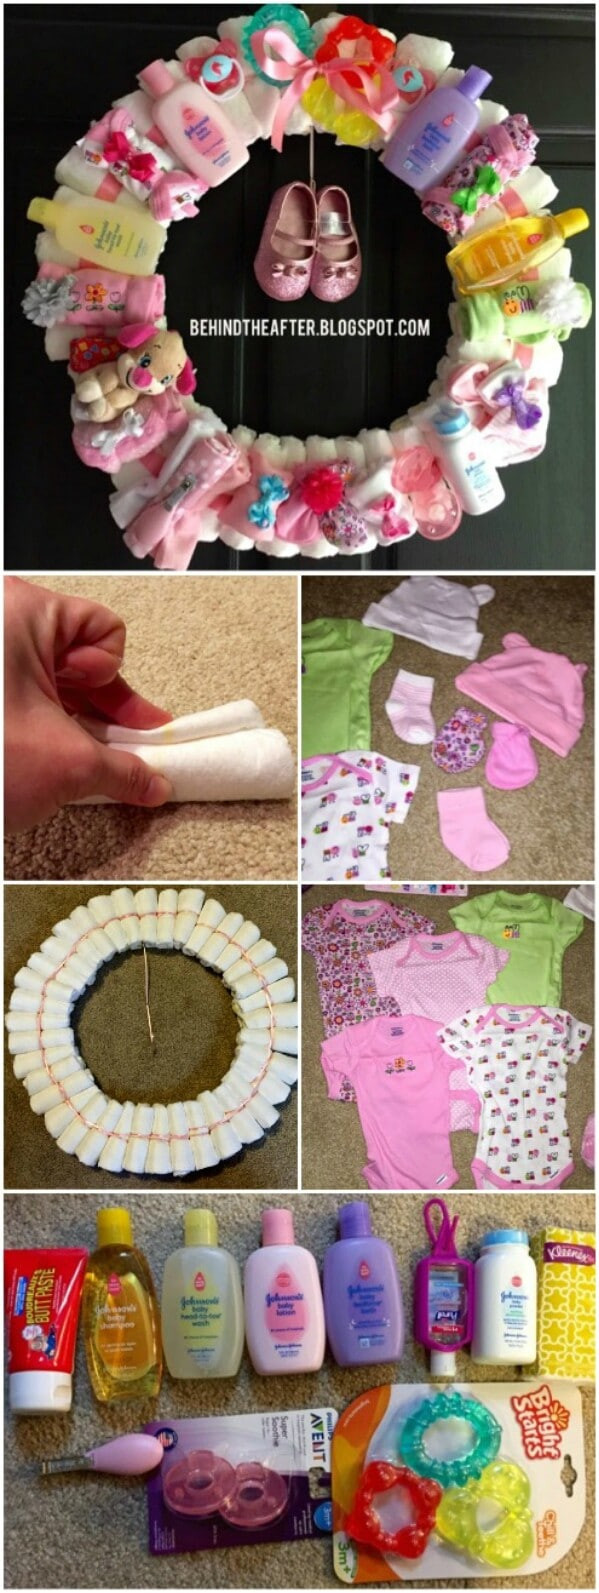 Baby Shower Homemade Gift Ideas
 25 Enchantingly Adorable Baby Shower Gift Ideas That Will